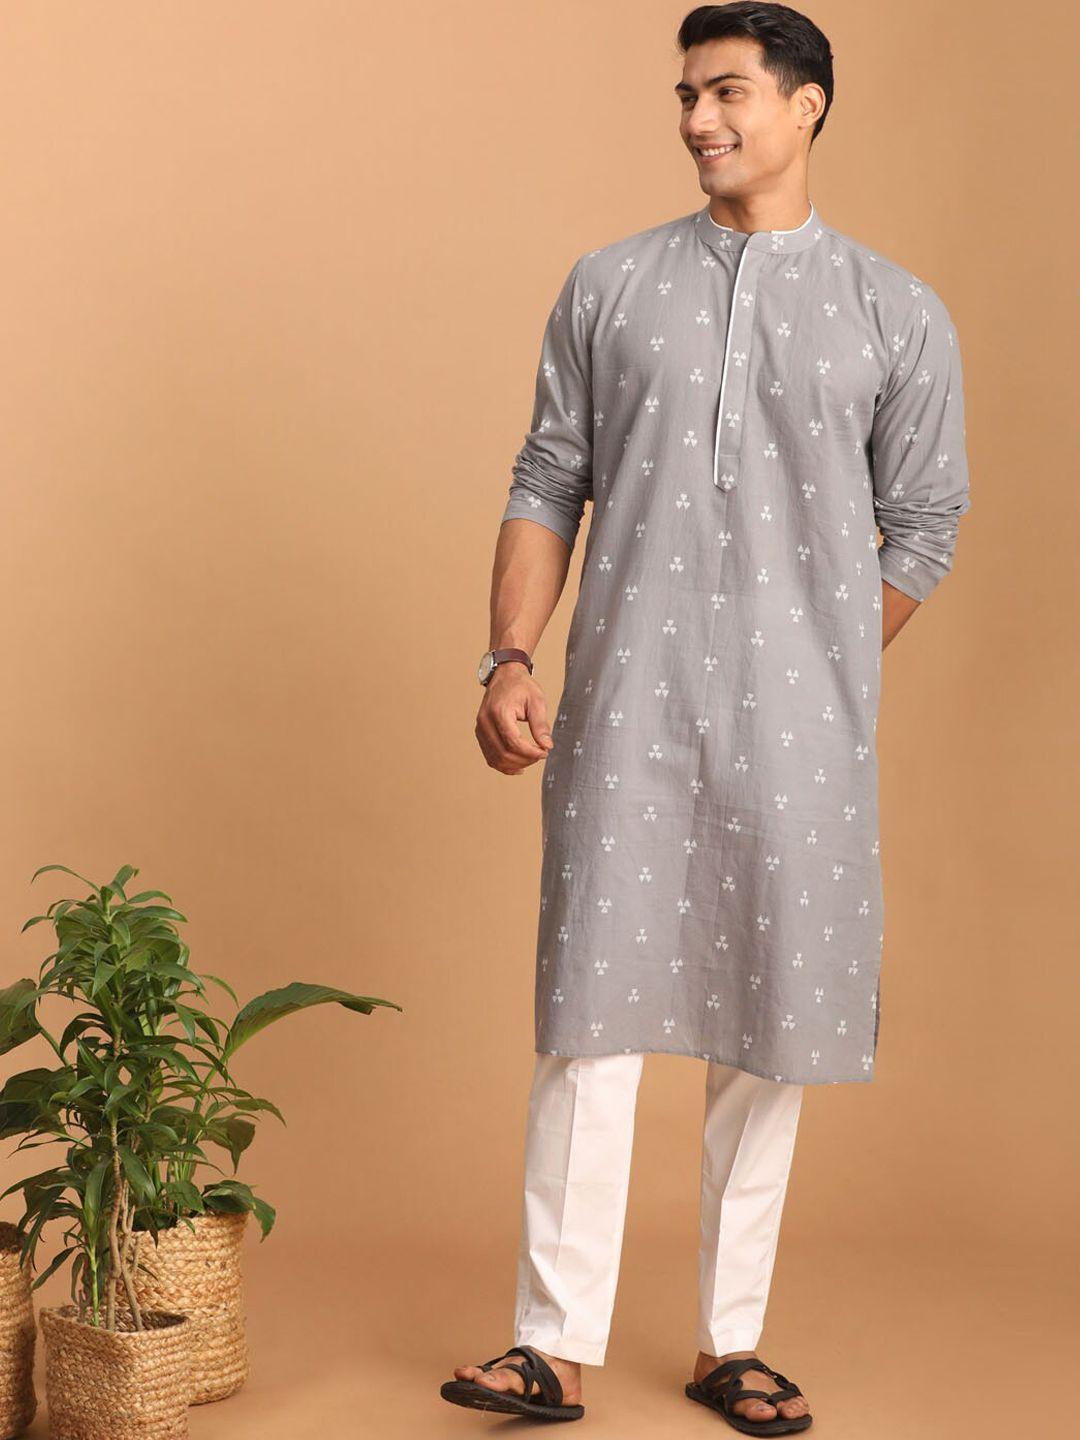 shvaas by vastramay woven design band collar pure cotton kurta with trousers